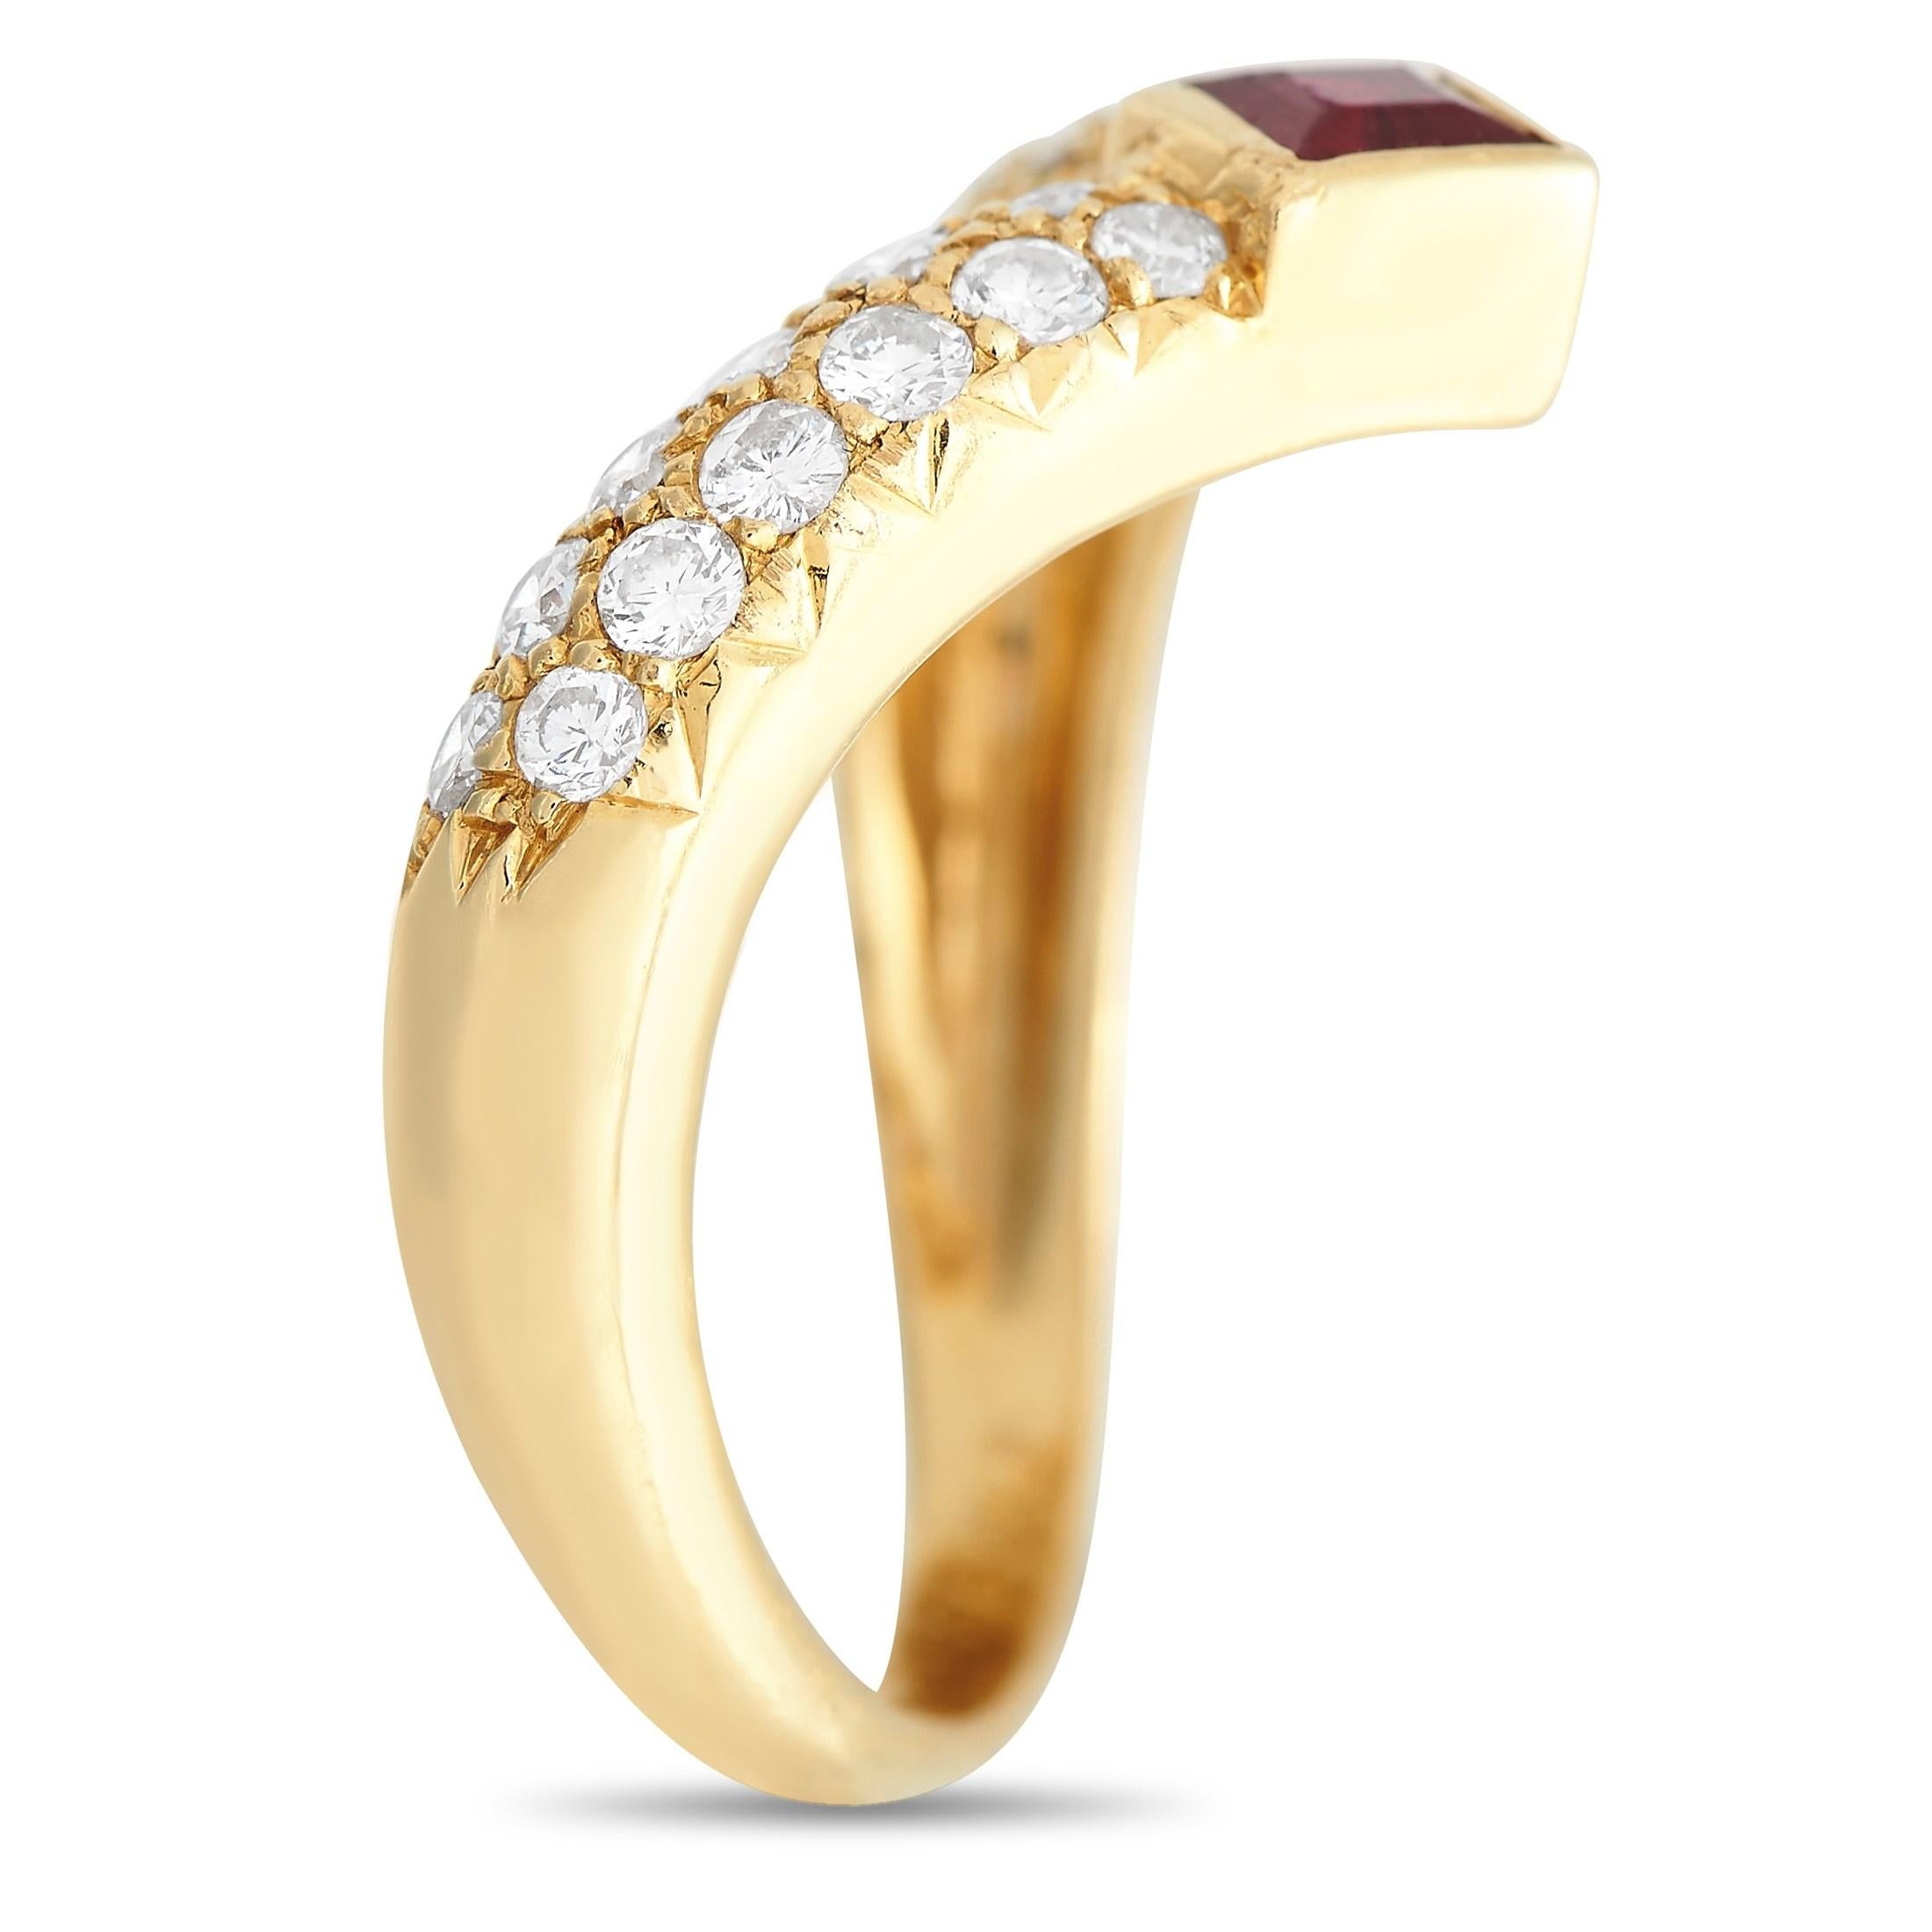 A uniquely curved setting made from 18K Yellow Gold makes this ring from Van Cleef & Arpels incredibly elegant. Sleek and dynamic in design, the 2mm wide band is adorned with 0.50 carats of diamonds with E color and VVS clarity. A single ruby